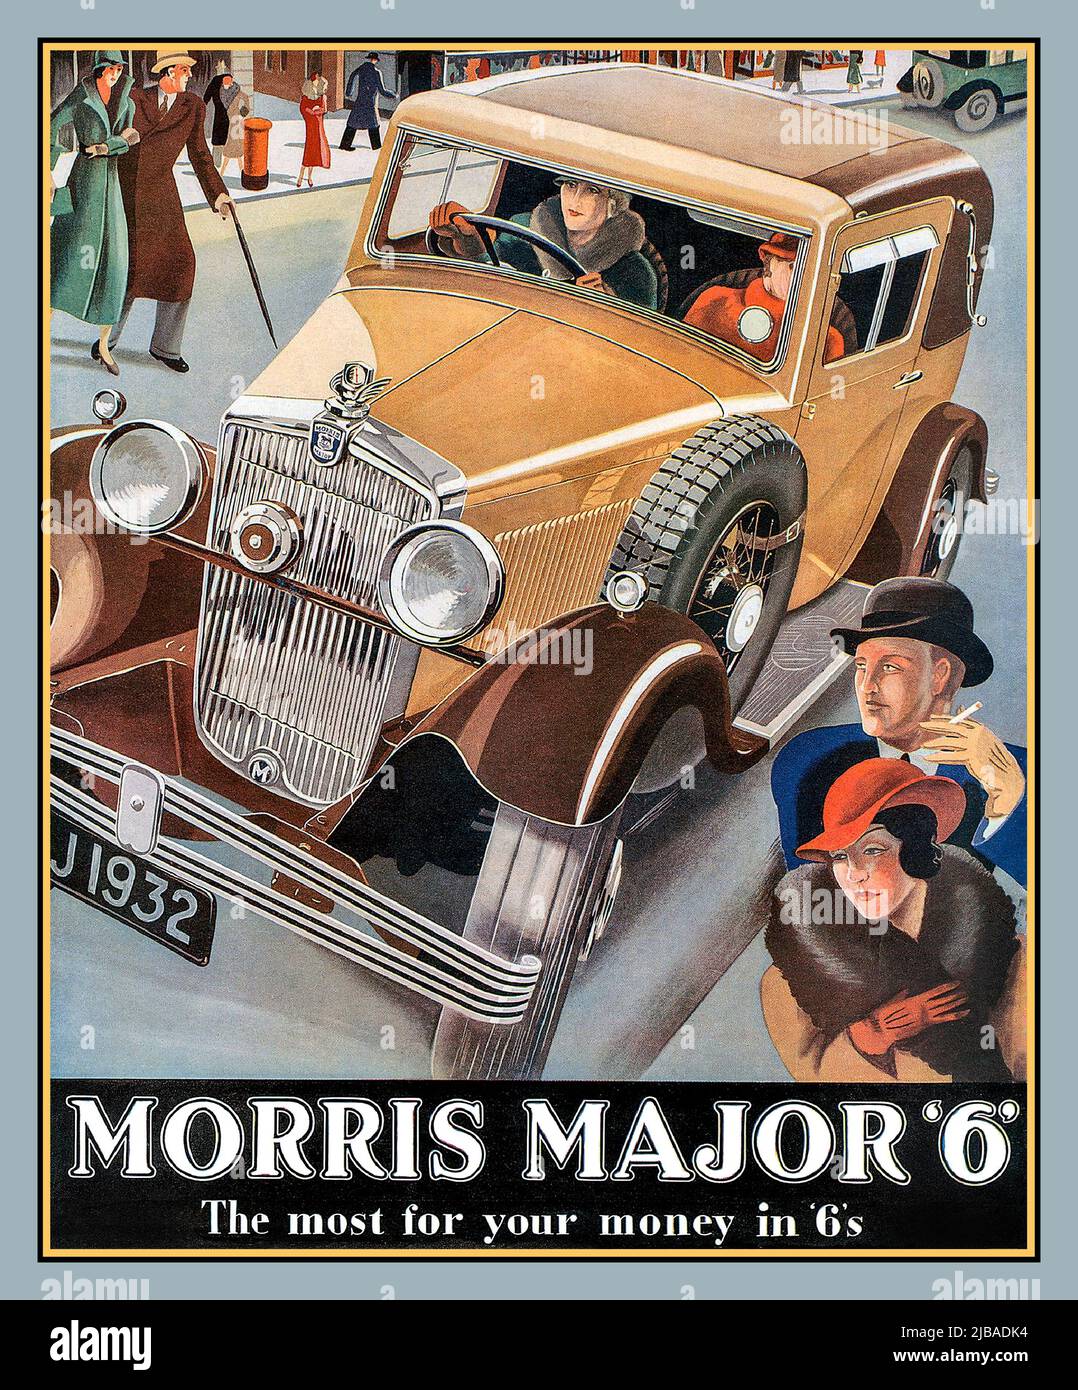 MORRIS 1930s British Motorcar Vintage 1932 Press Advertisement Poster for the British Morris Major 6 two door 'The most for your money in 6s '1932 Vintage Car Poster Morris Major 6 'The most for your money in 6s' British made Morris 2 door coupe motocar. Stock Photo